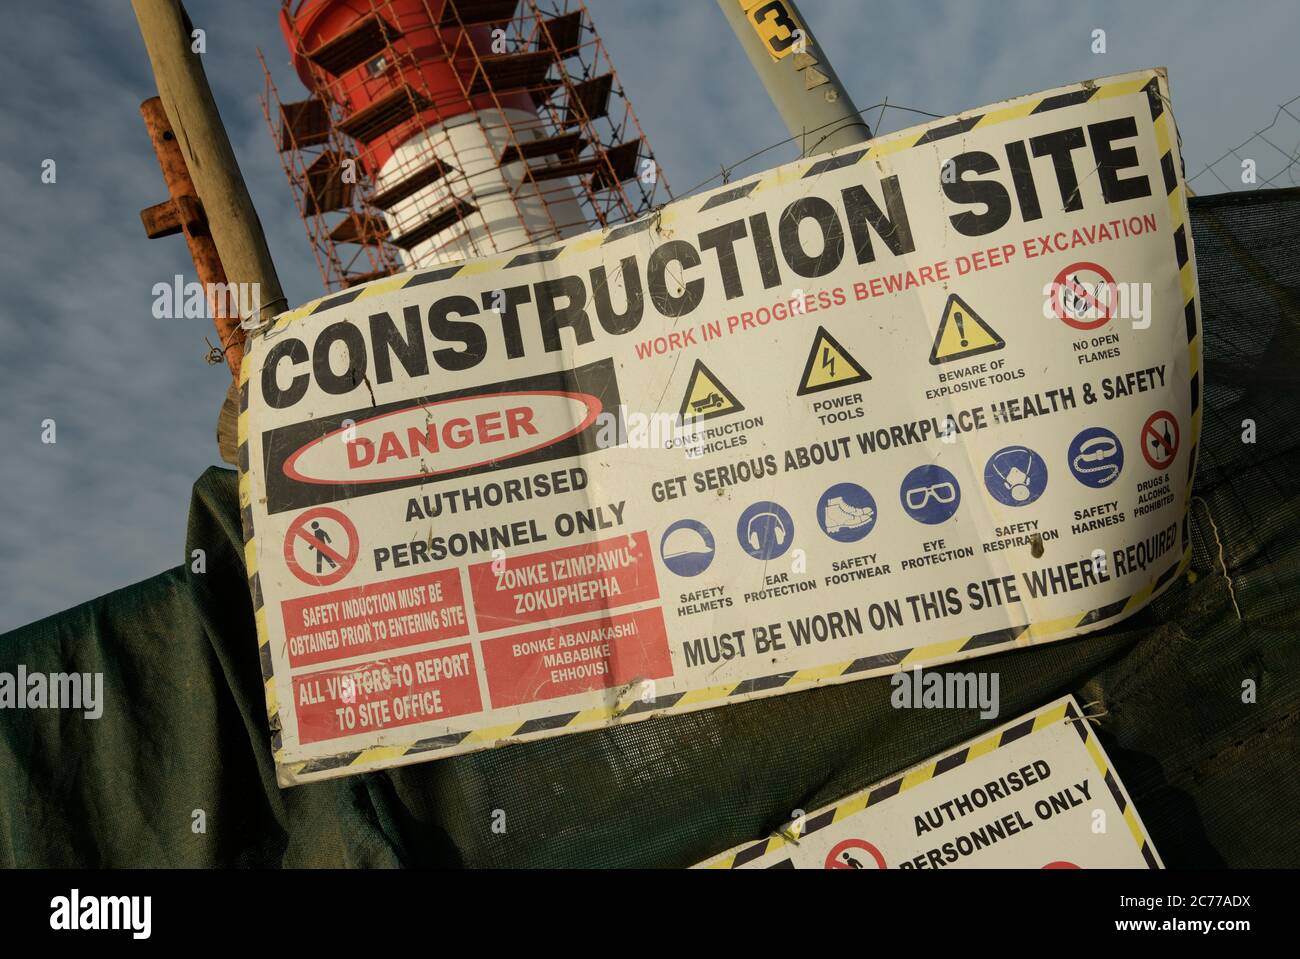 Construction site, health and safety sign, danger, risk, hazard, workplace, Durban, South Africa, work in progress, project, warning, information Stock Photo